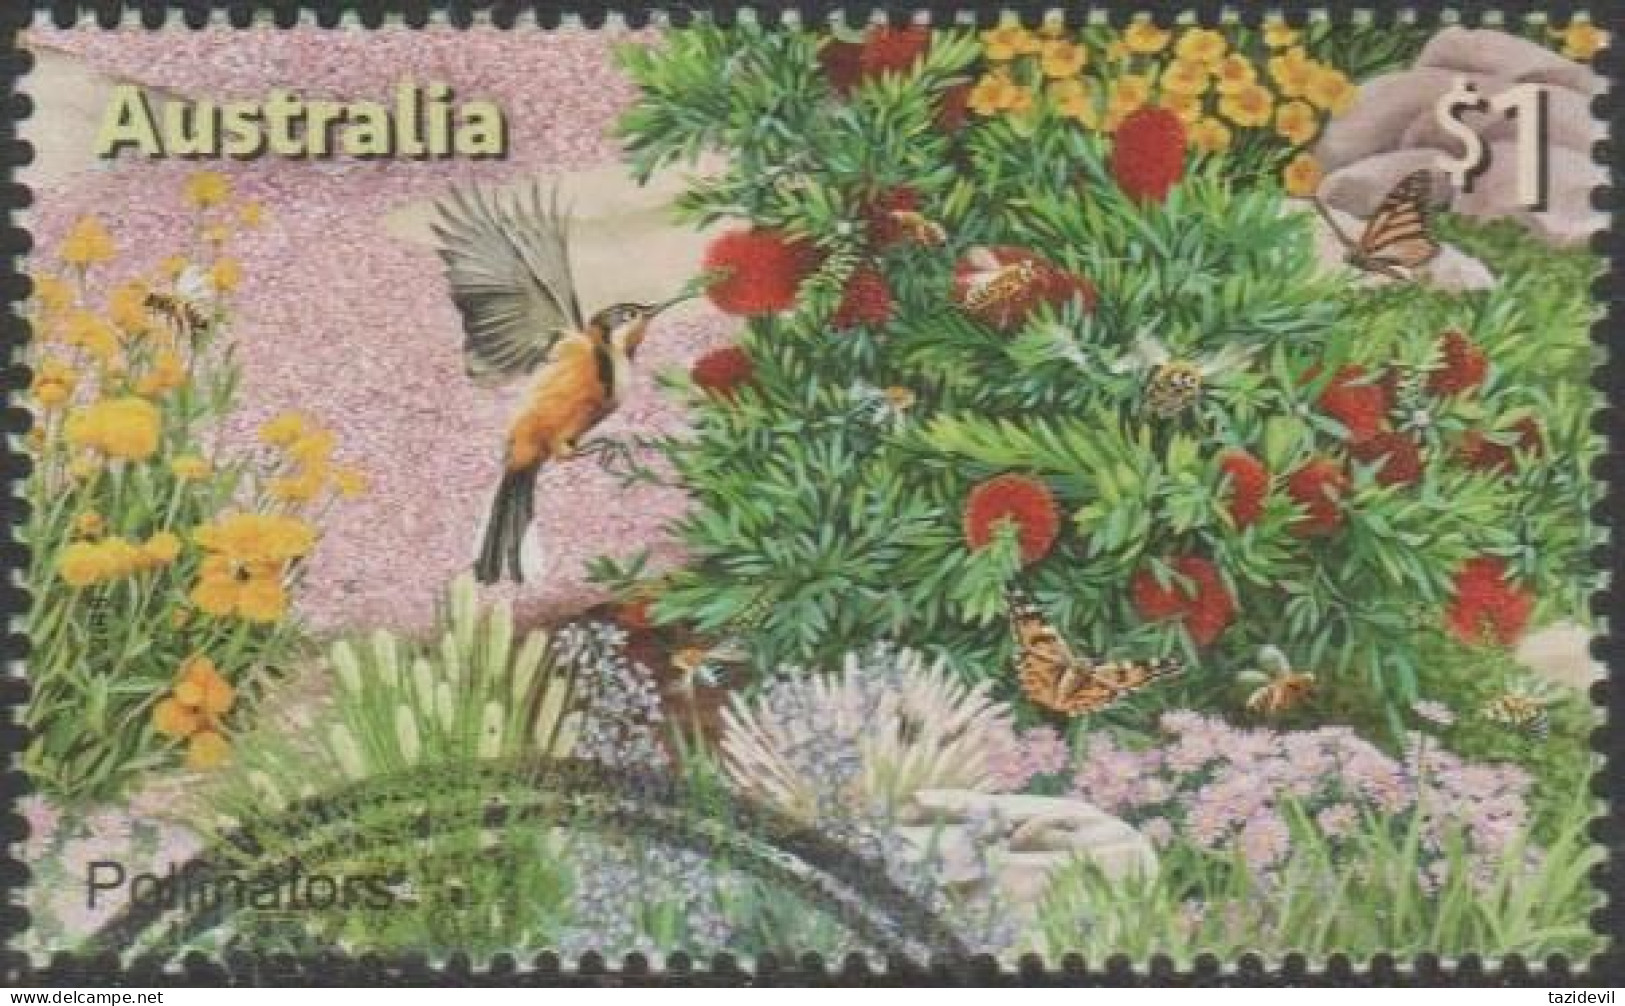 AUSTRALIA - USED 2019 $1.00 Stamp Collecting Month - In The Garden - Pollinators - Used Stamps